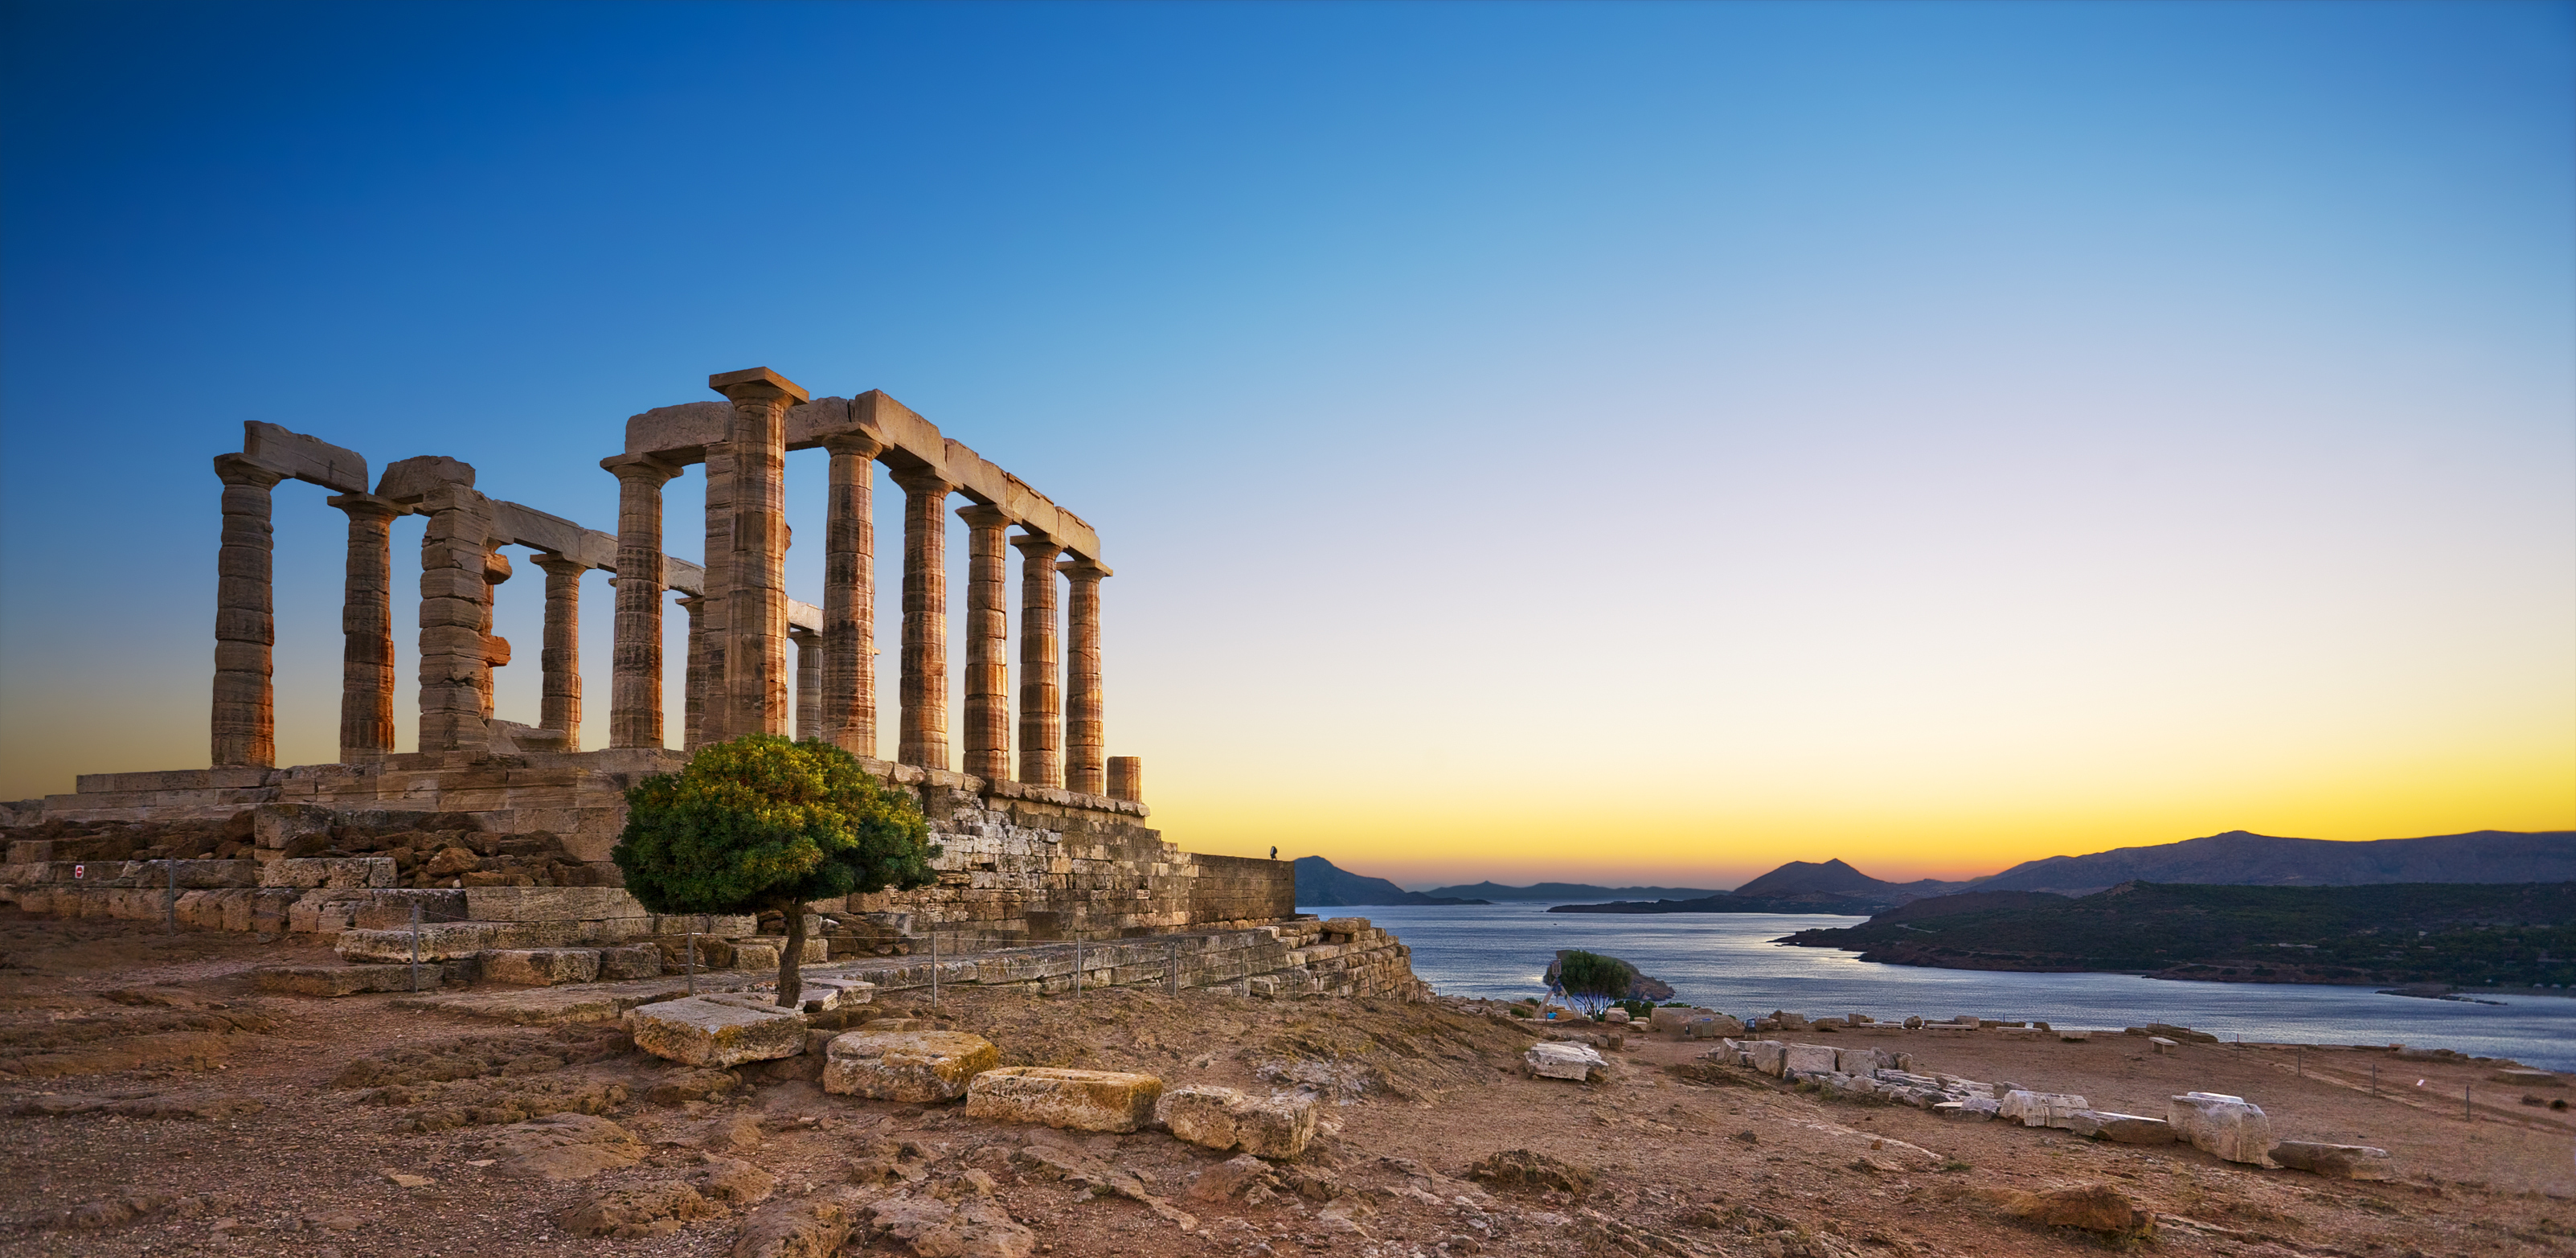 An image of the temple of Poseidon at sunset